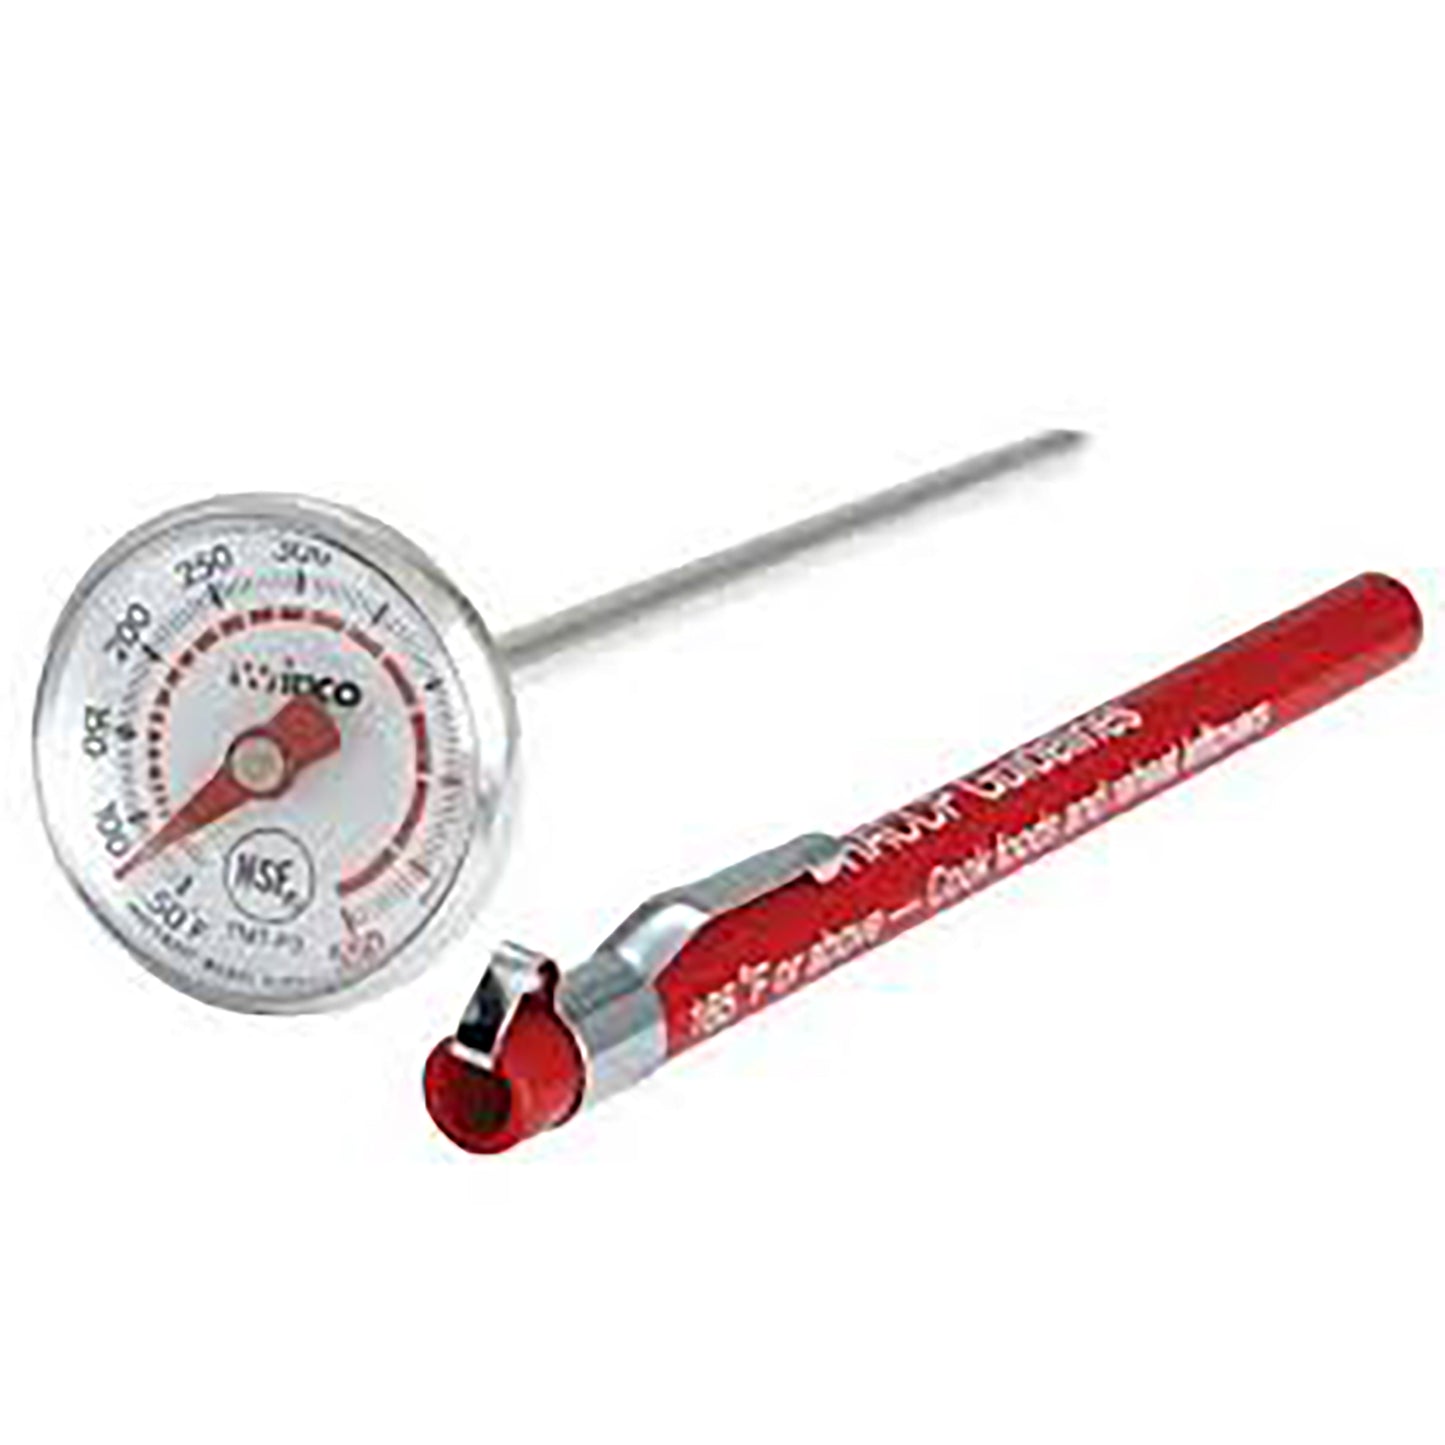 POCKET MEAT THERMOMETER